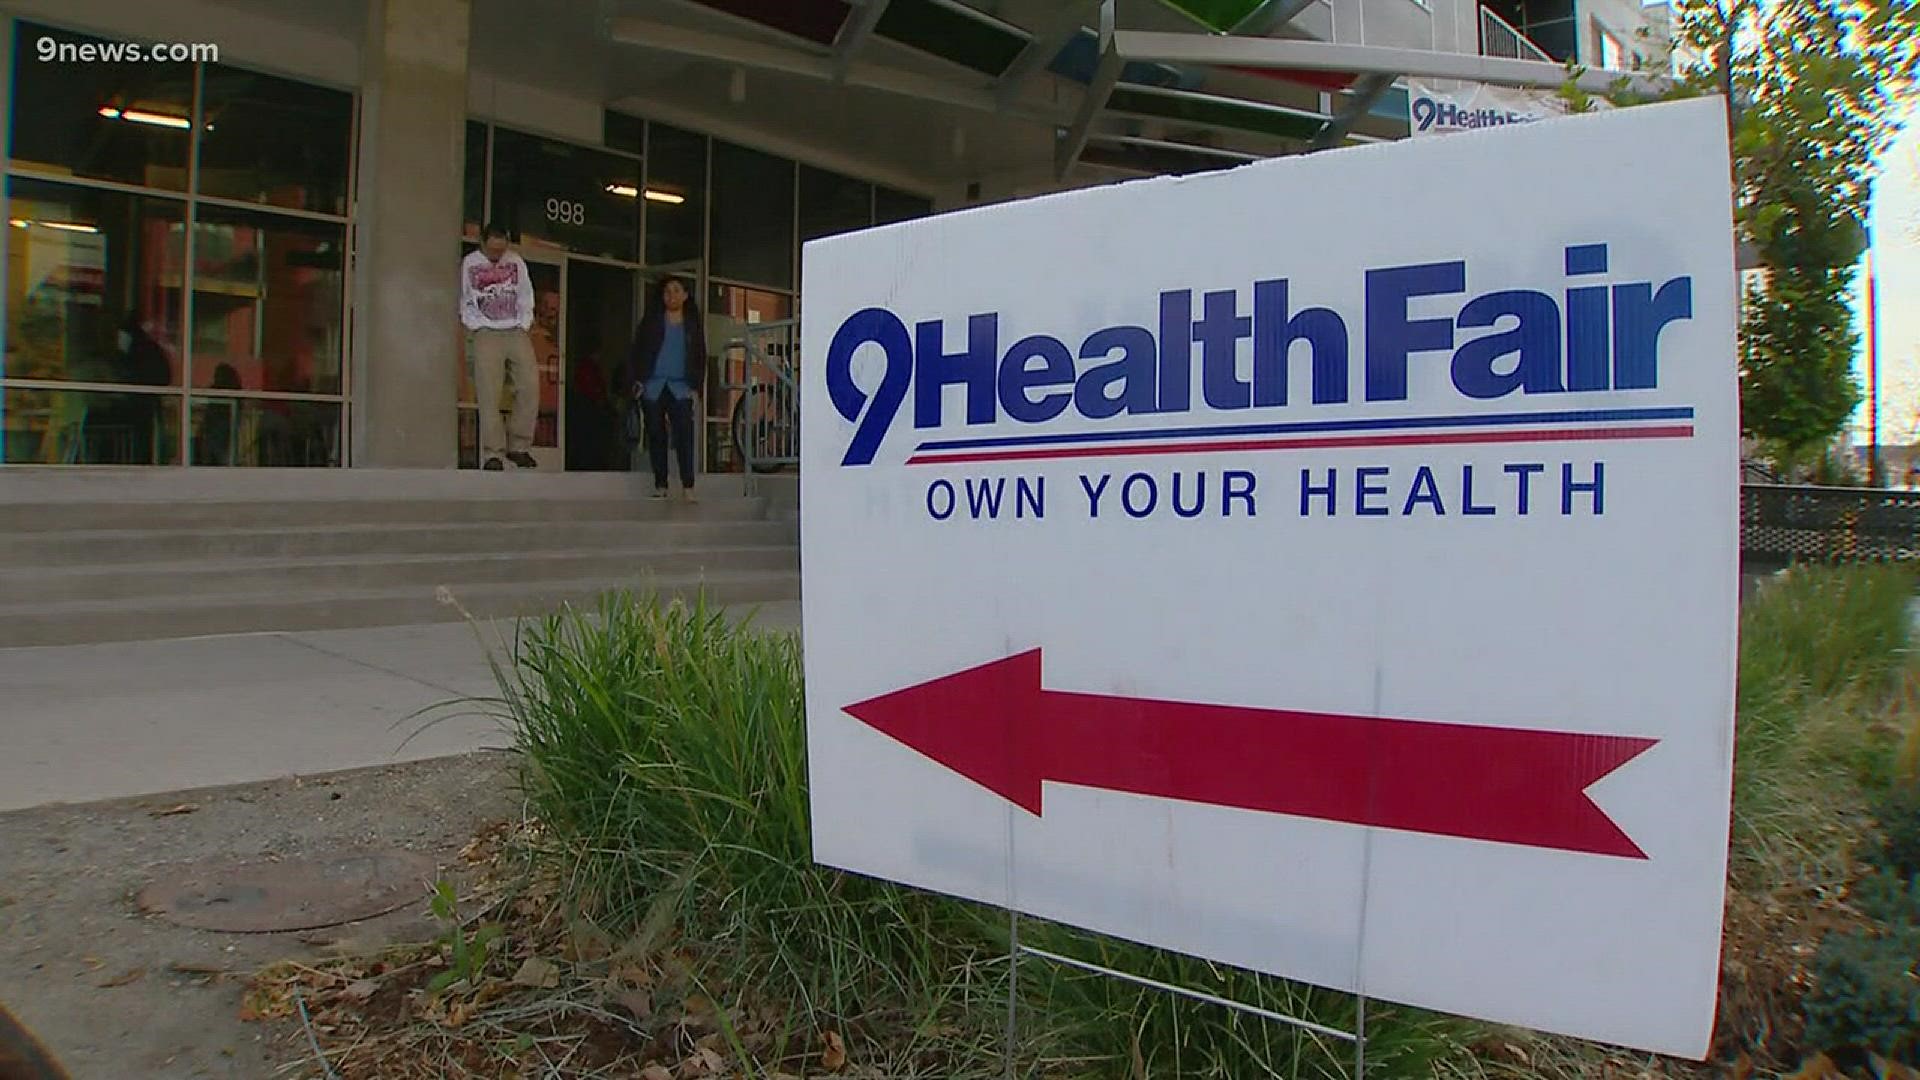 It is 9Health Fair season and we are covering a variety of health topics to give you the information you need to be healthier. We talked with Dr. Josie Broussard, an assistant professor at CU School of Medicine – Center for Women’s Health Research about sleep and your health.